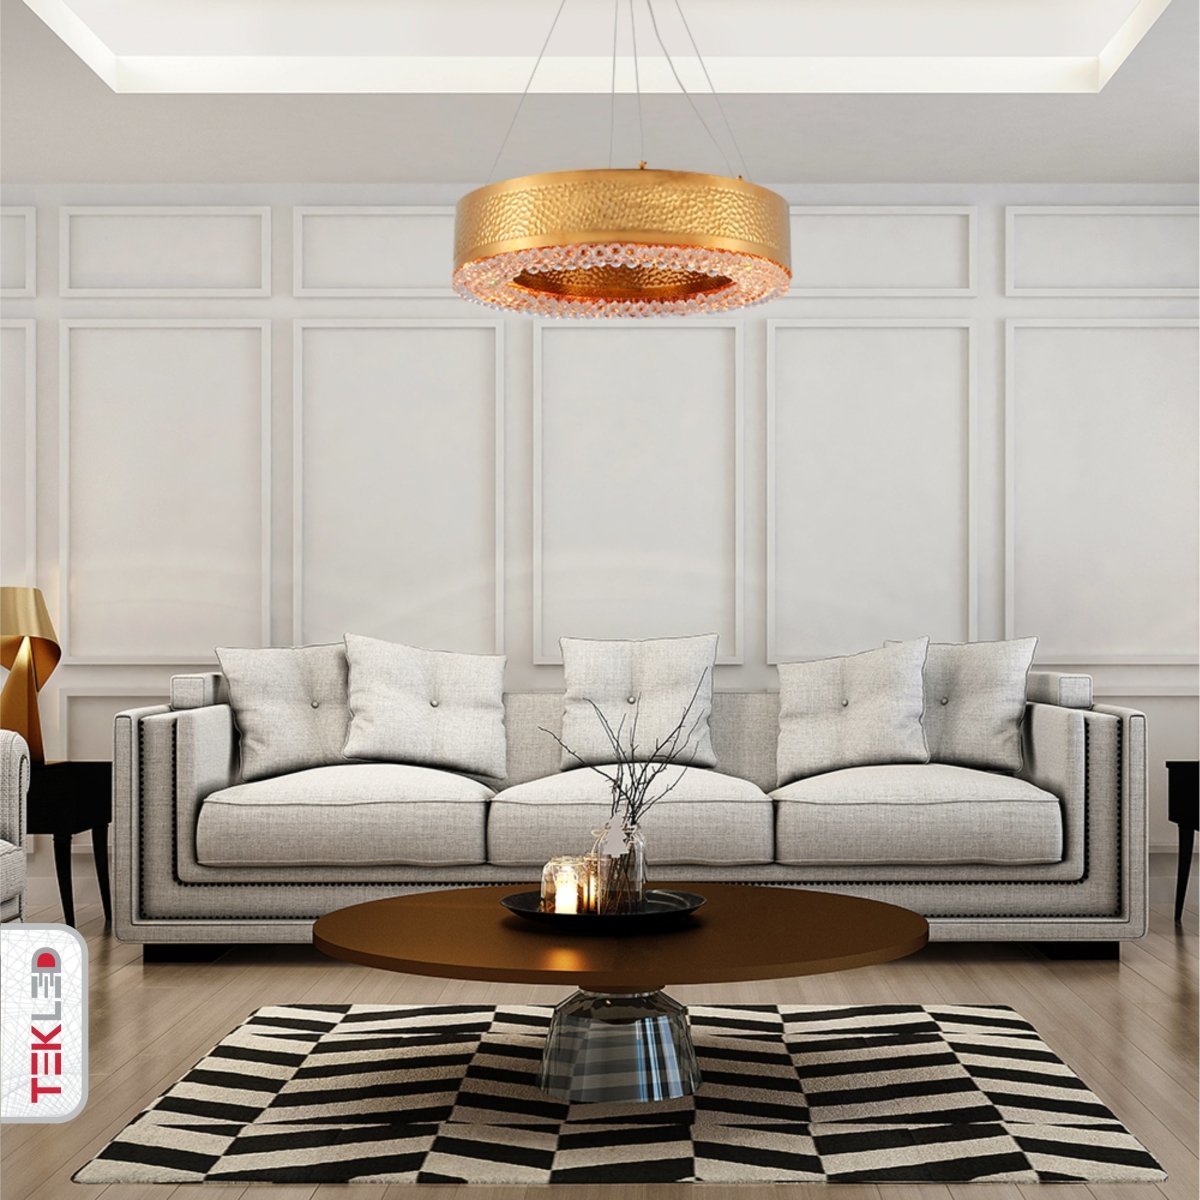 Indoor usage of Ball Crystal Gold Metal Chandelier D600 with 8XE14 Fitting | TEKLED 156-19564